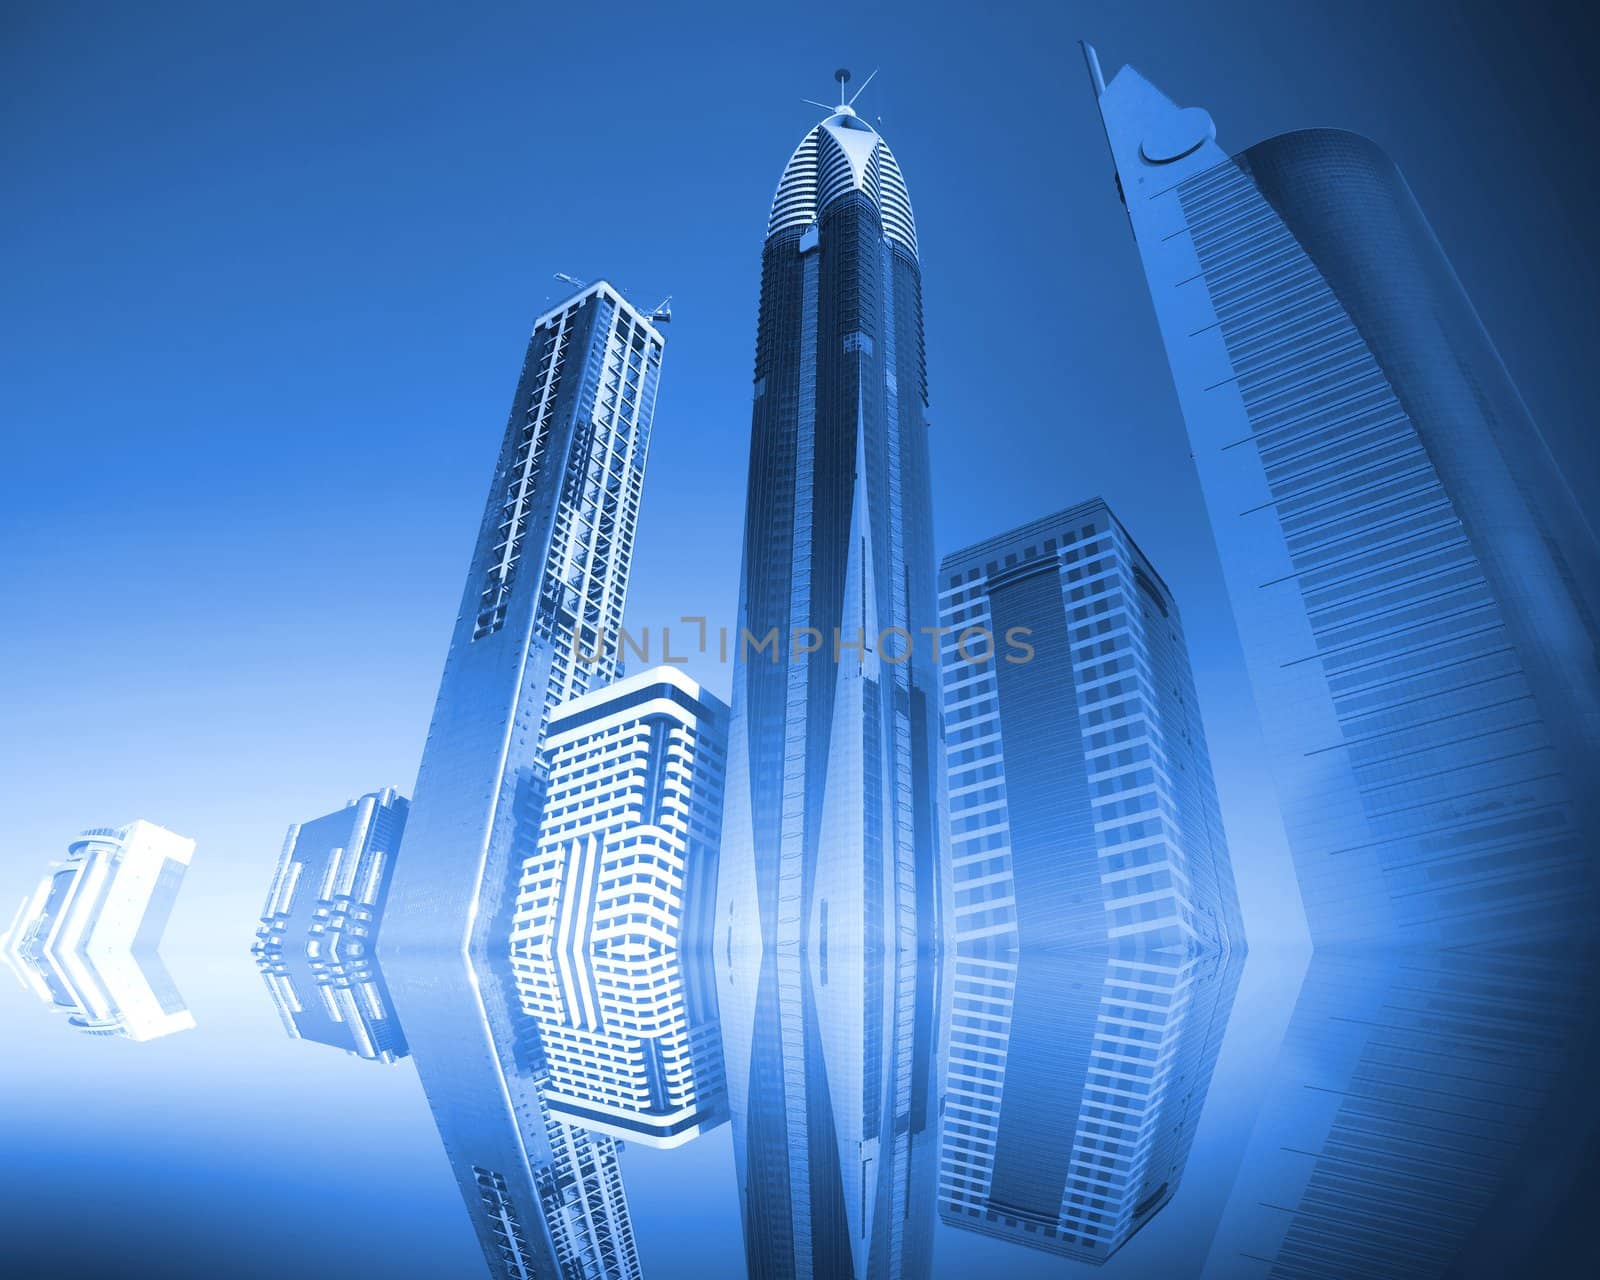 picture of urban landscape with blue glass skyscrapers